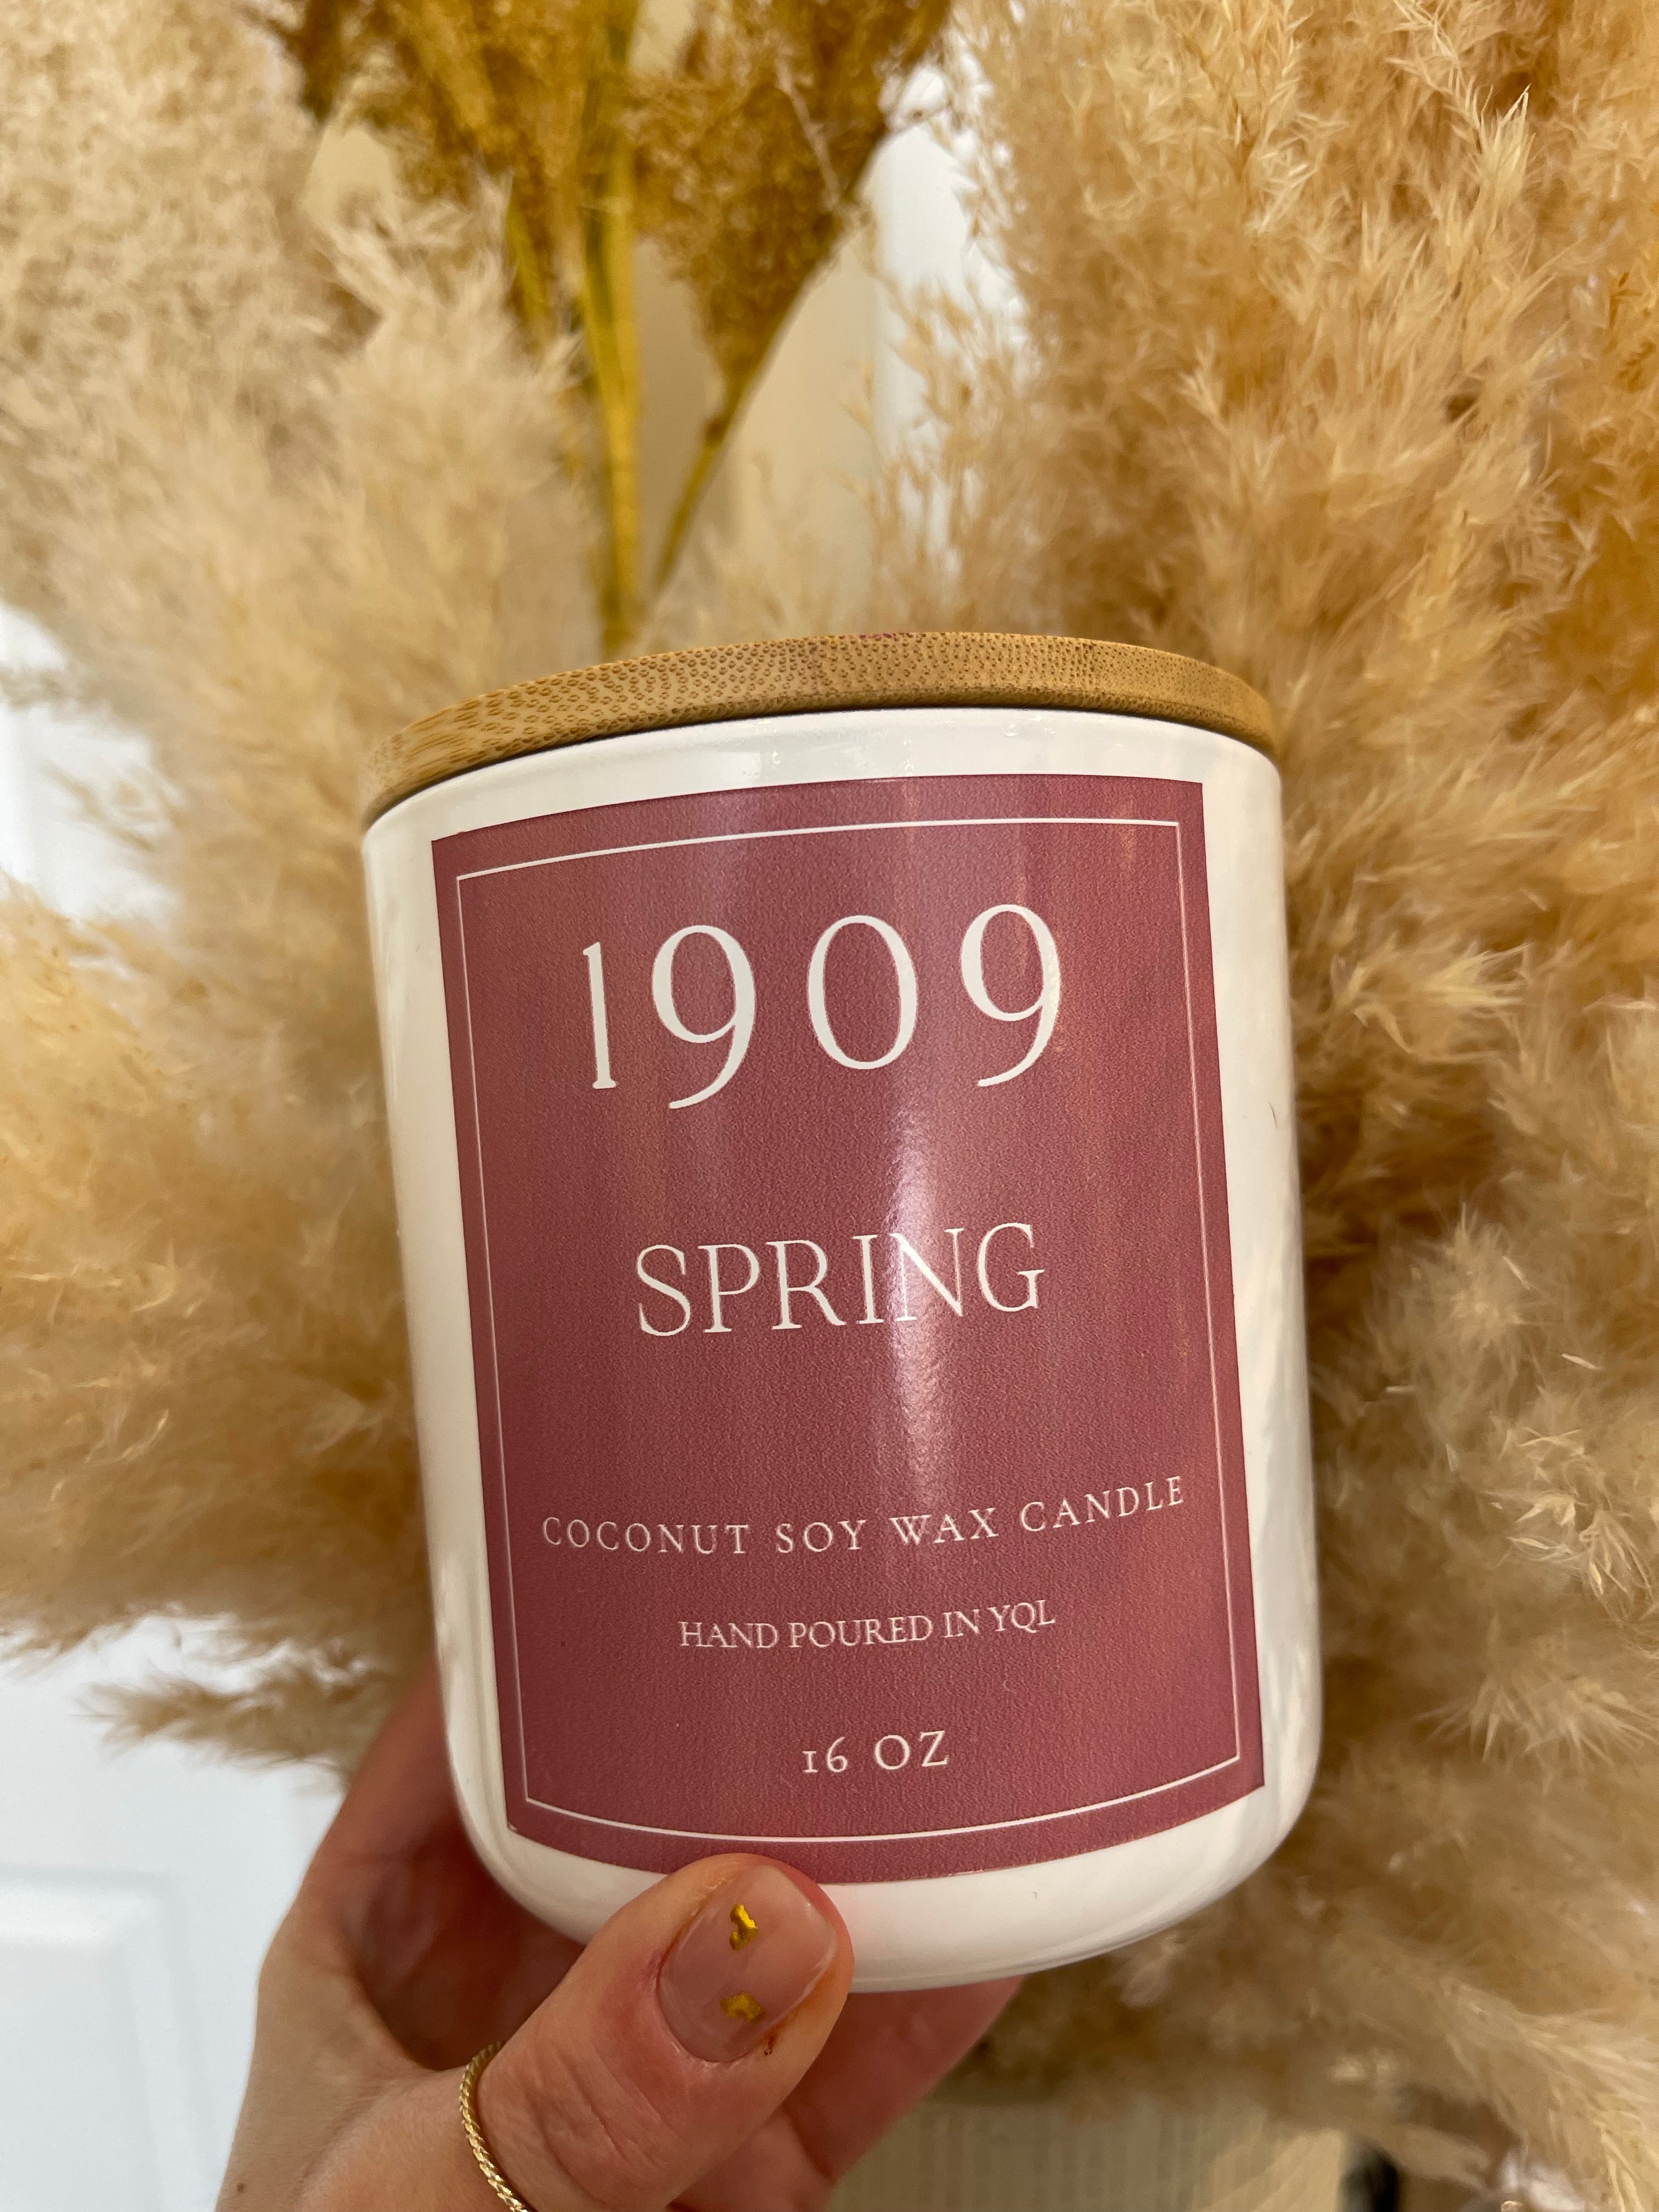 1909 Spring Candle